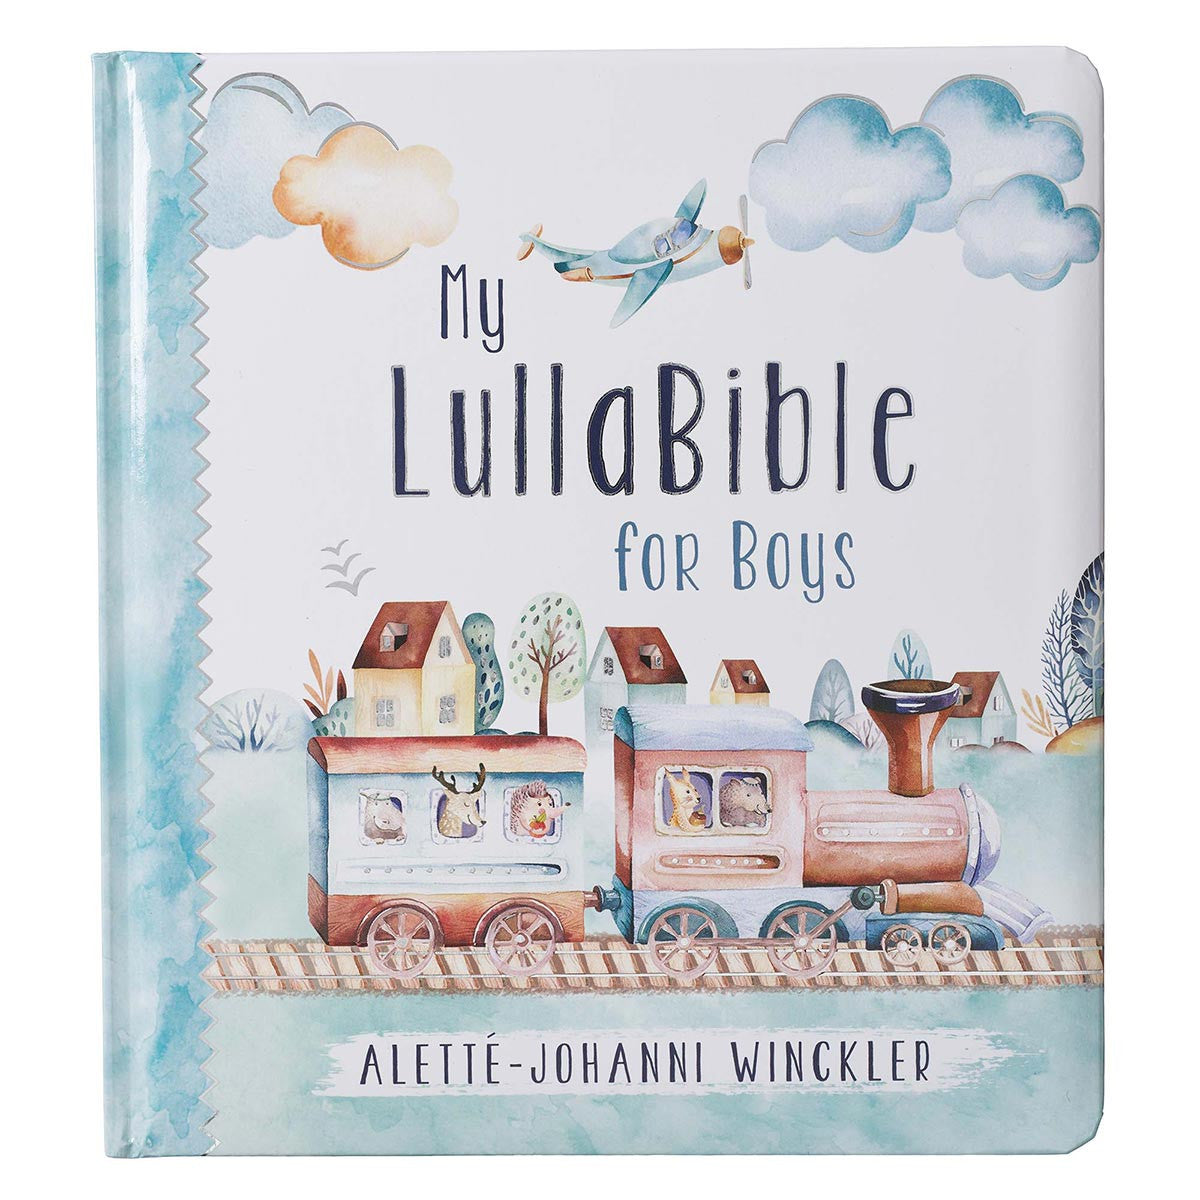 ROCKONLINE | New Creation Church | NCC | Joseph Prince | ROCK Bookshop | ROCK Bookstore | Star Vista | Children | Kids | Bible Story | Christian Living | Bible | My LullaBible for Boys Bible Storybook | Christian Art Gifts | Free delivery for Singapore orders above $50.